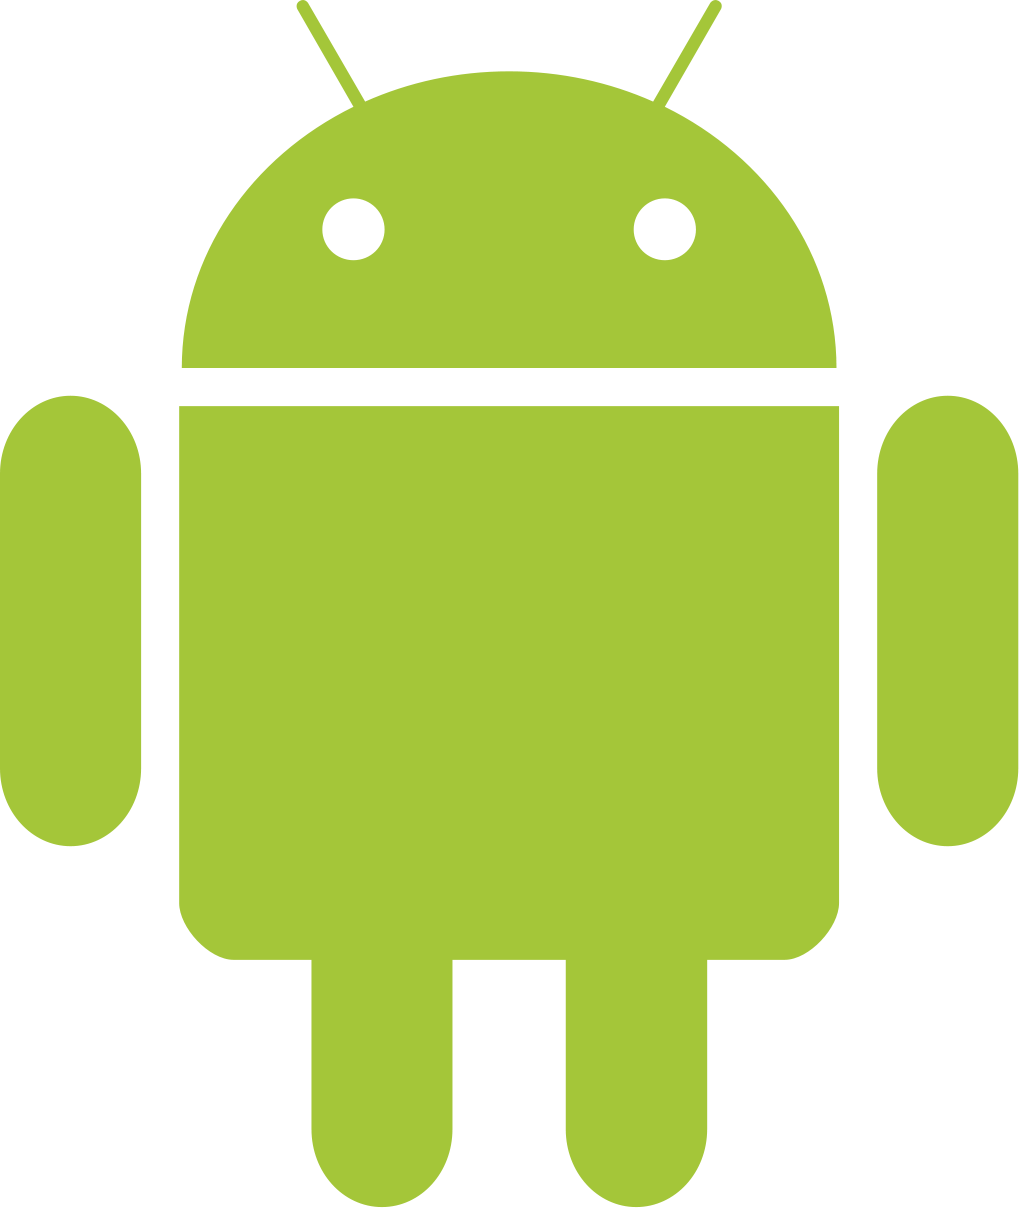 android logo PNG17